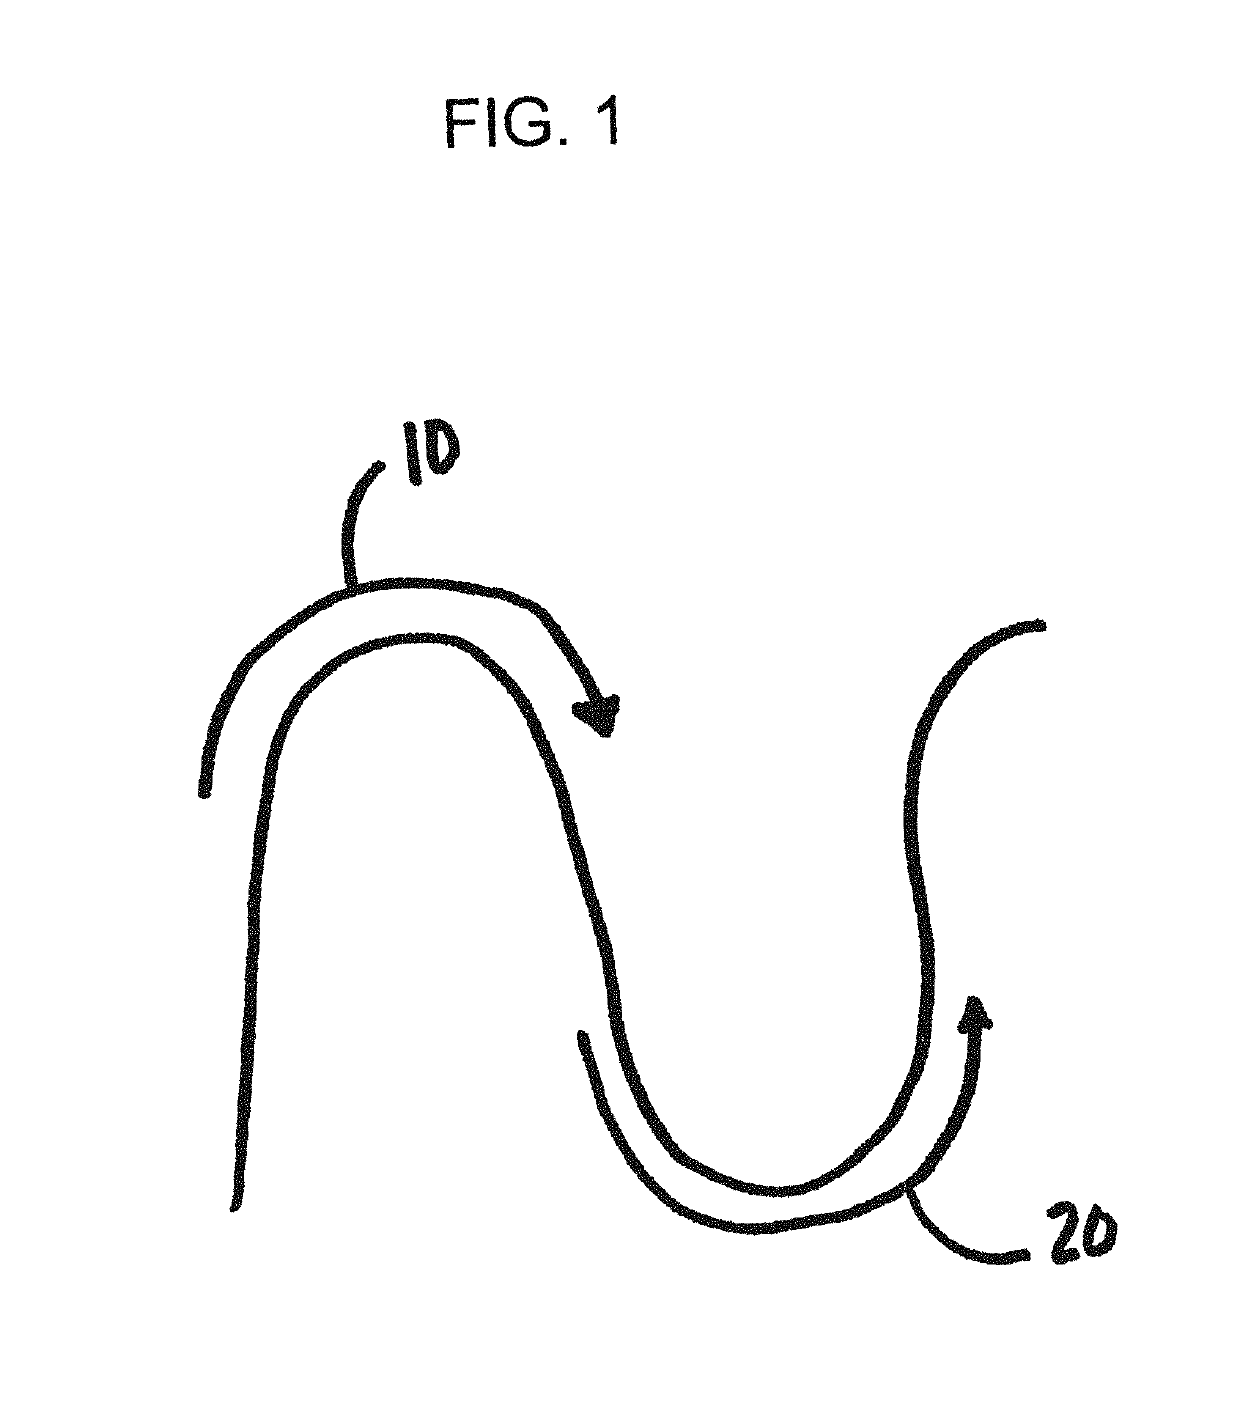 Medical balloon devices and methods